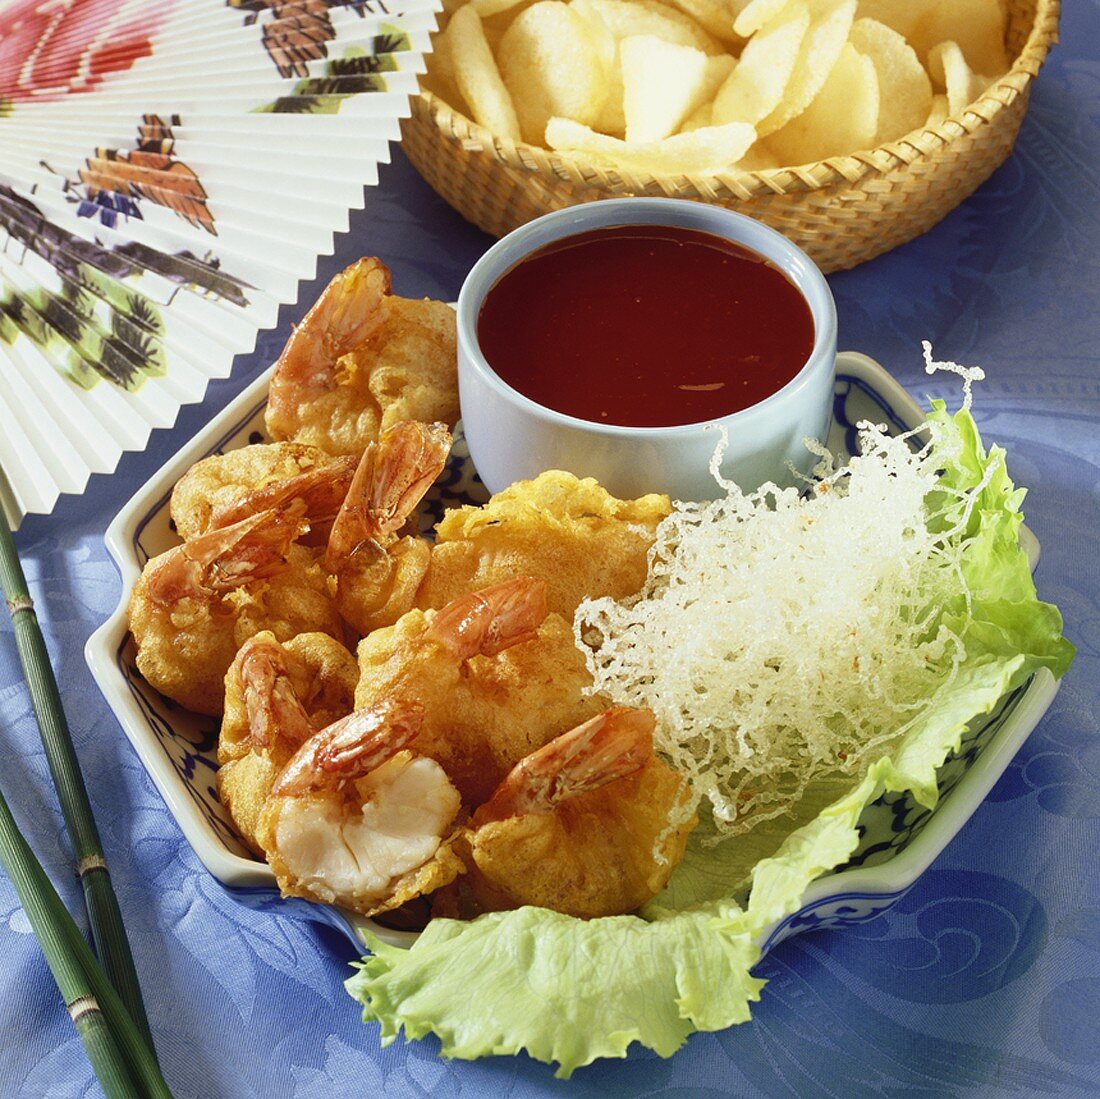 Prawns in batter with dip and deep-fried glass noodles